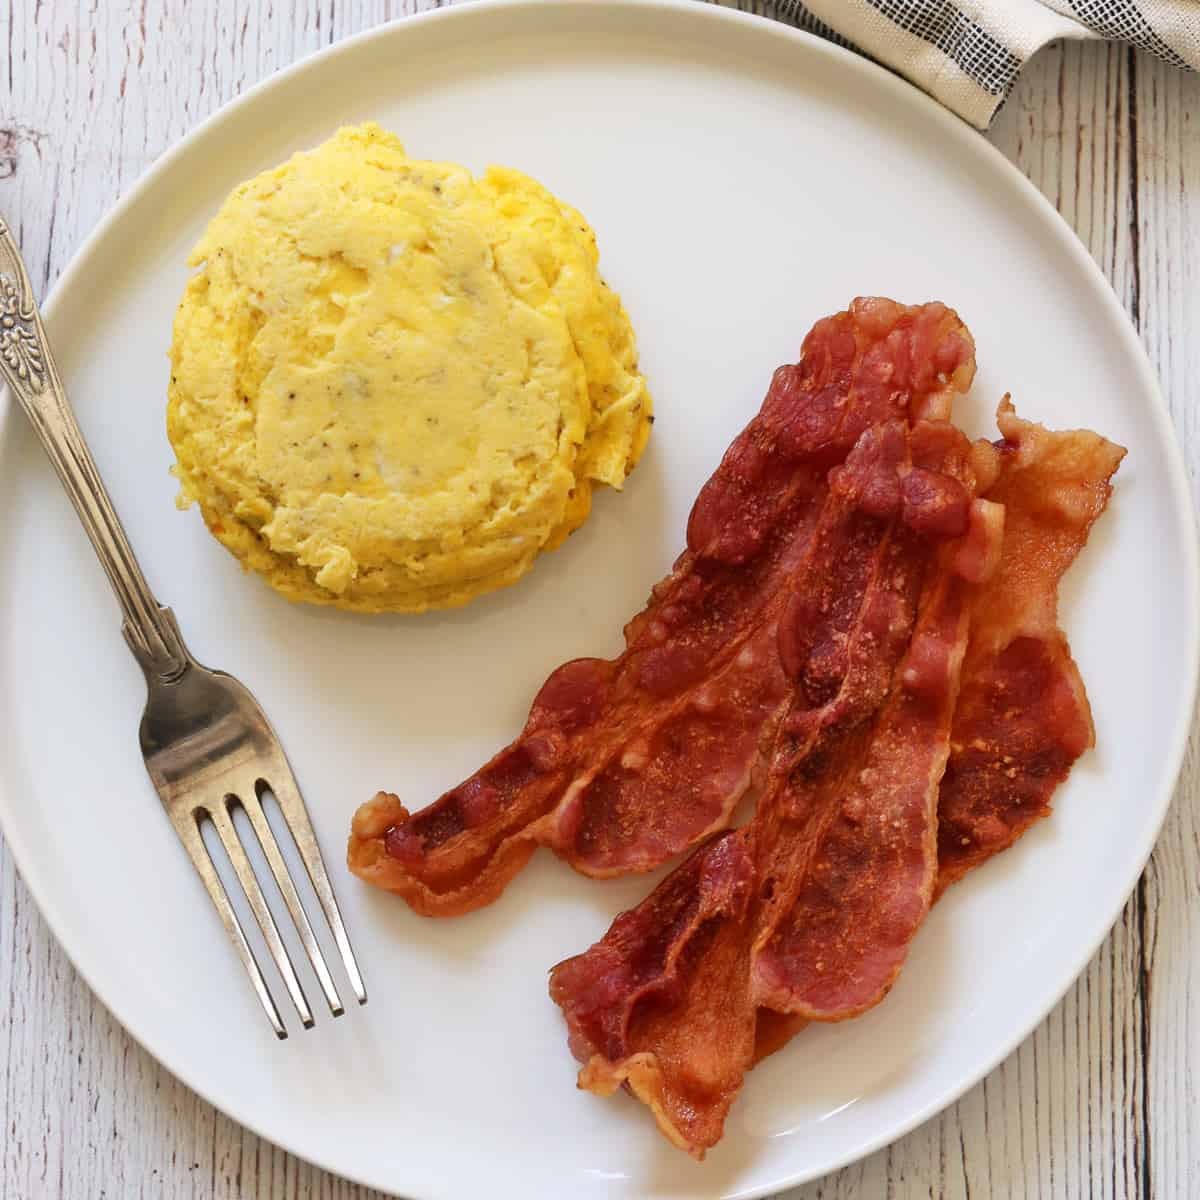 Microwave scrambled eggs are served with microwave bacon.